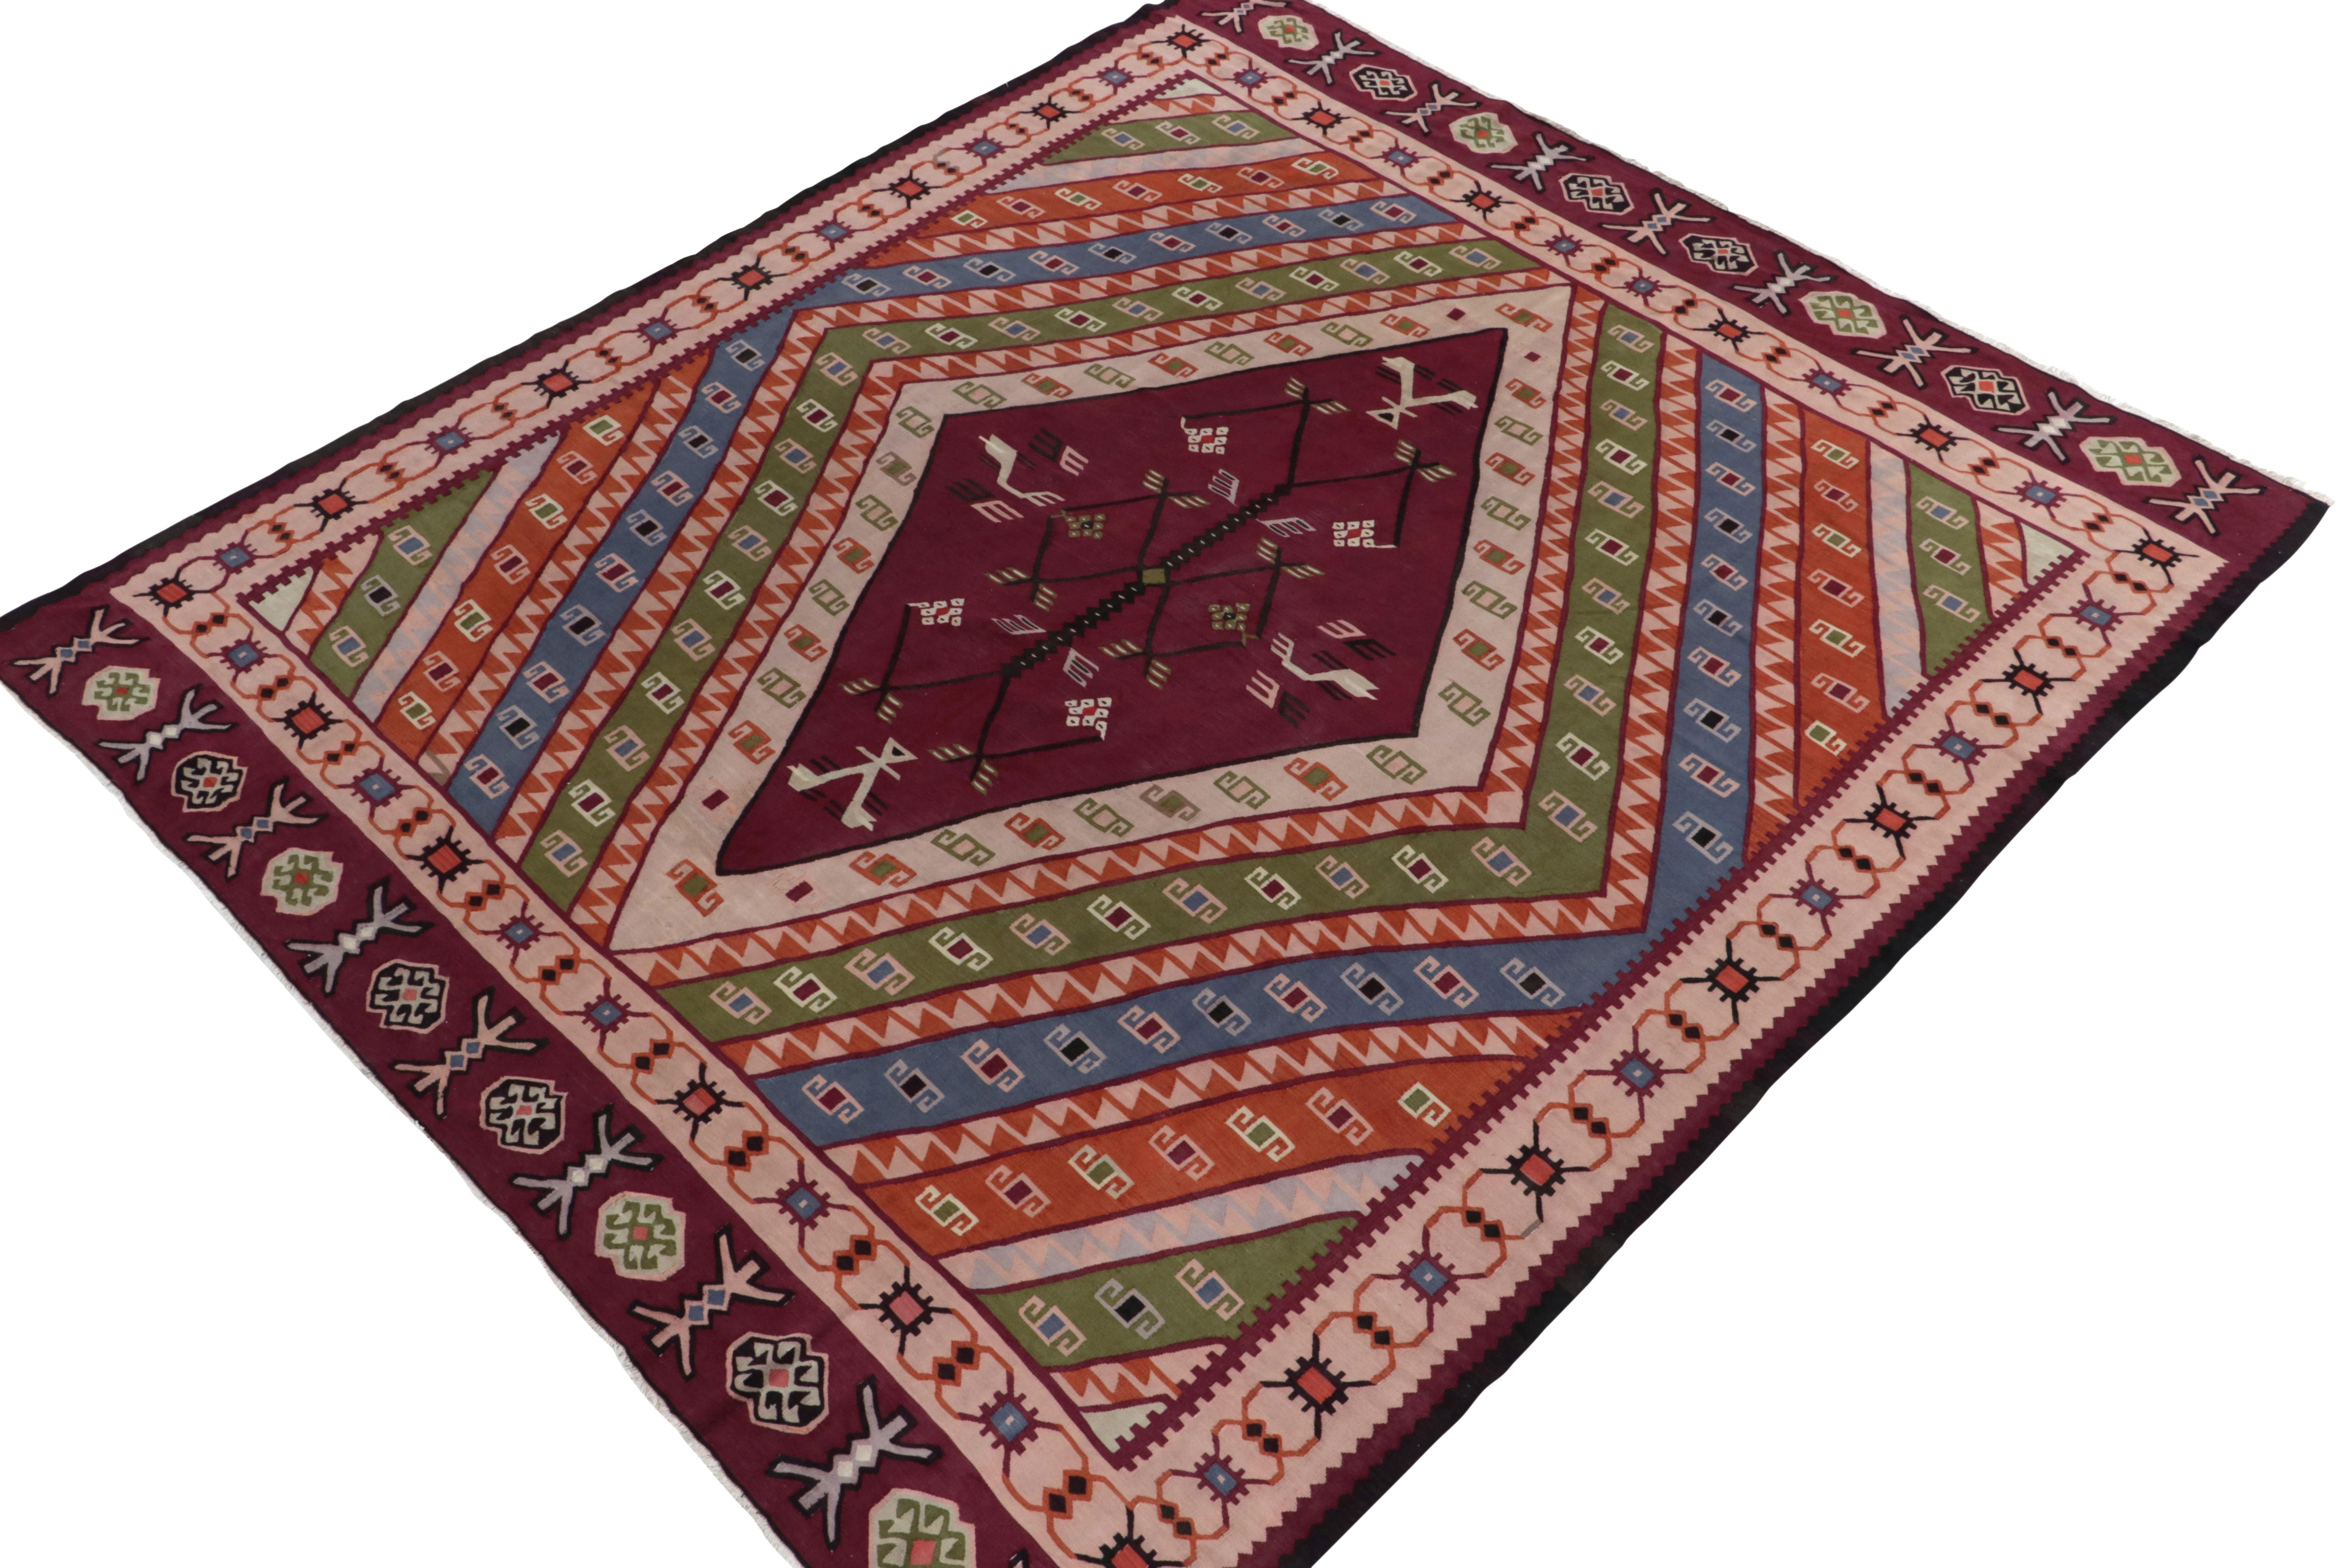 Handwoven in fine wool, a 9x10 antique kilim rug from Turkey, among the most rare additions to our coveted collection. 

Carrying a folk art appeal, the 1920s piece reflects a subtle Macedonian sensibility in design with traditional motifs